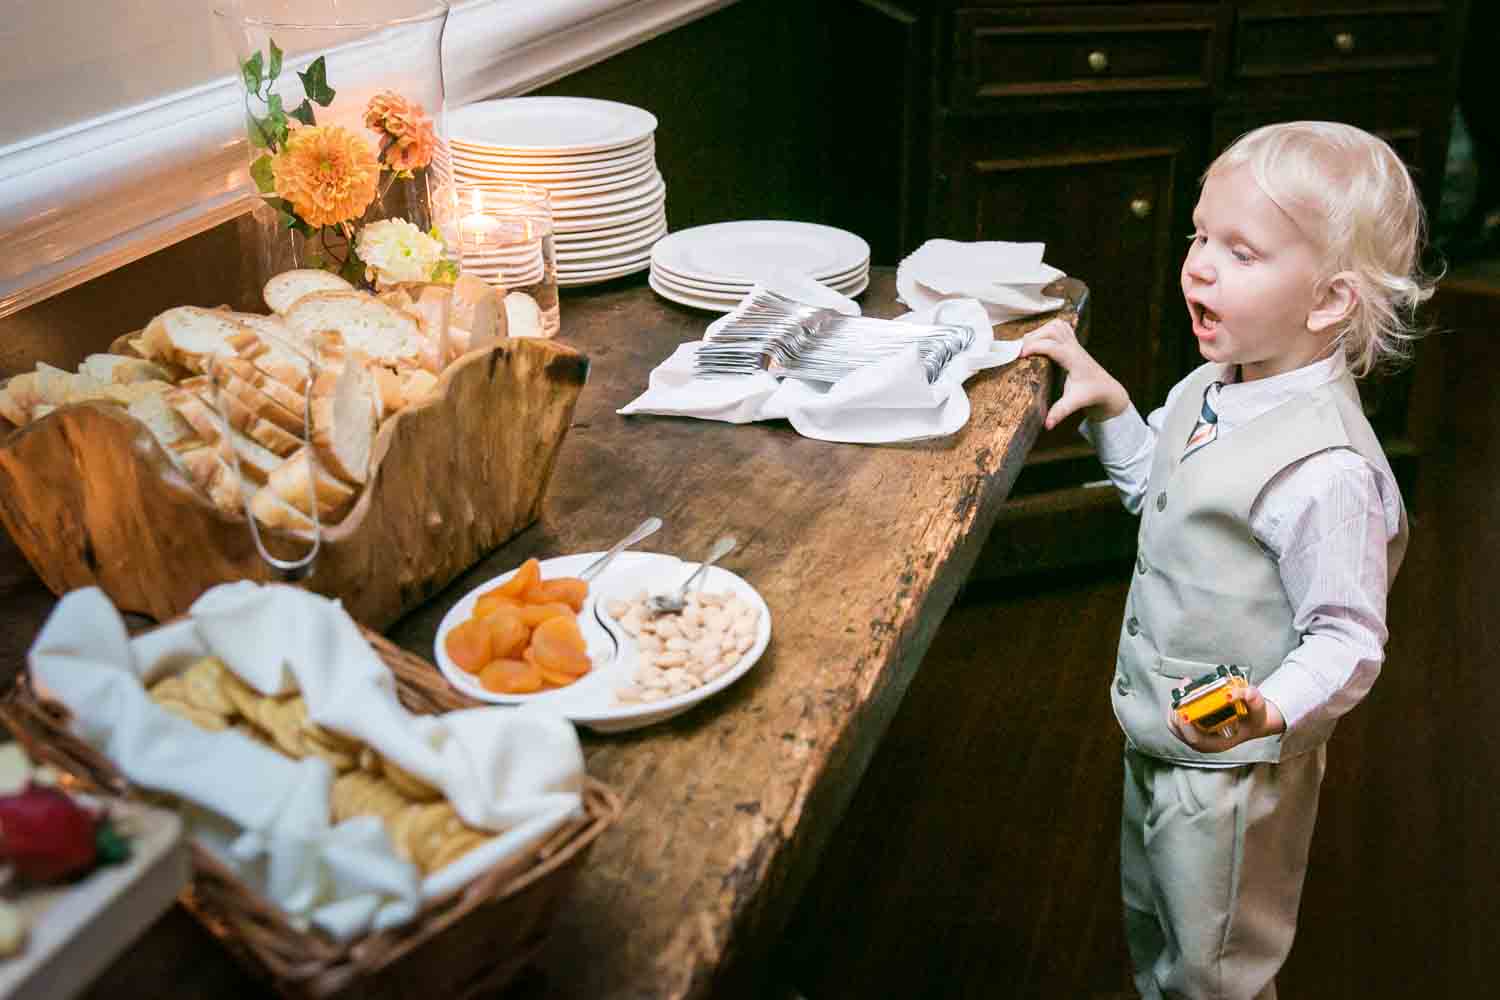 Little boy amazed by food at buffet